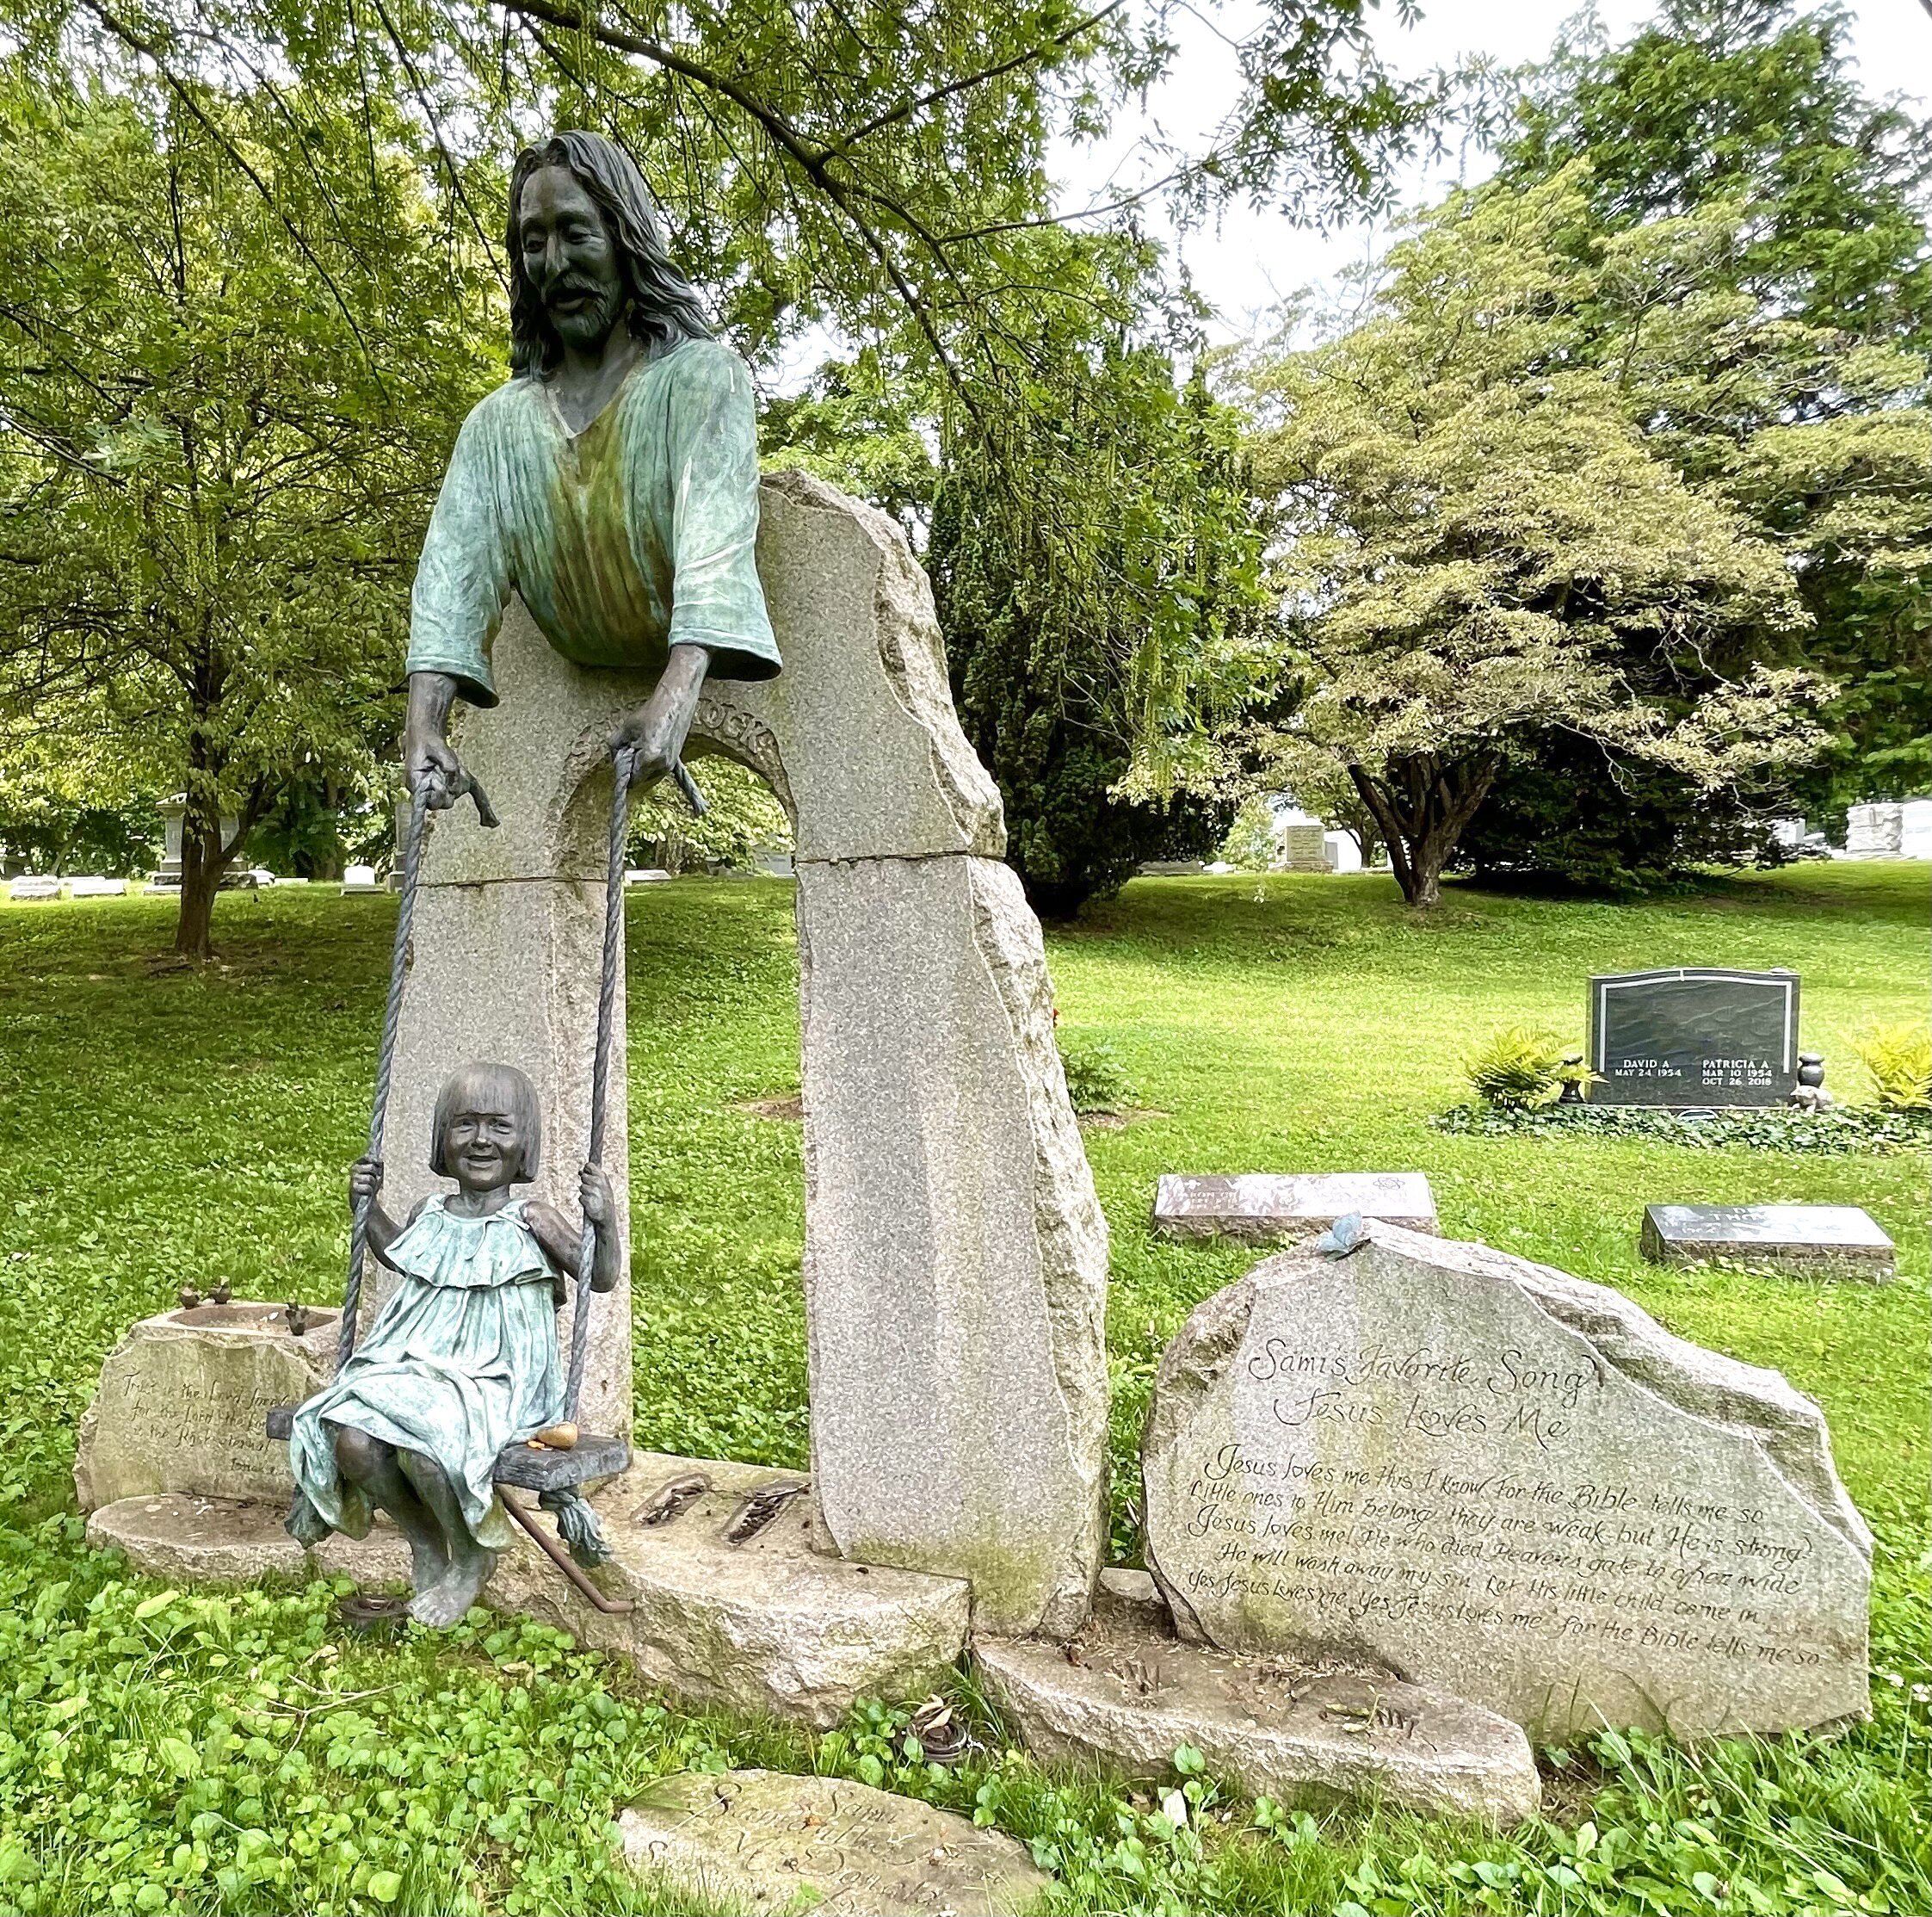  Okay, last one…but I wanted you to see this elaborate memorial for “Sam.” Also buried here is a renowned pioneer of hand and micro surgery, and the composer of the Happy Birthday song, Mildred J. Hill.  